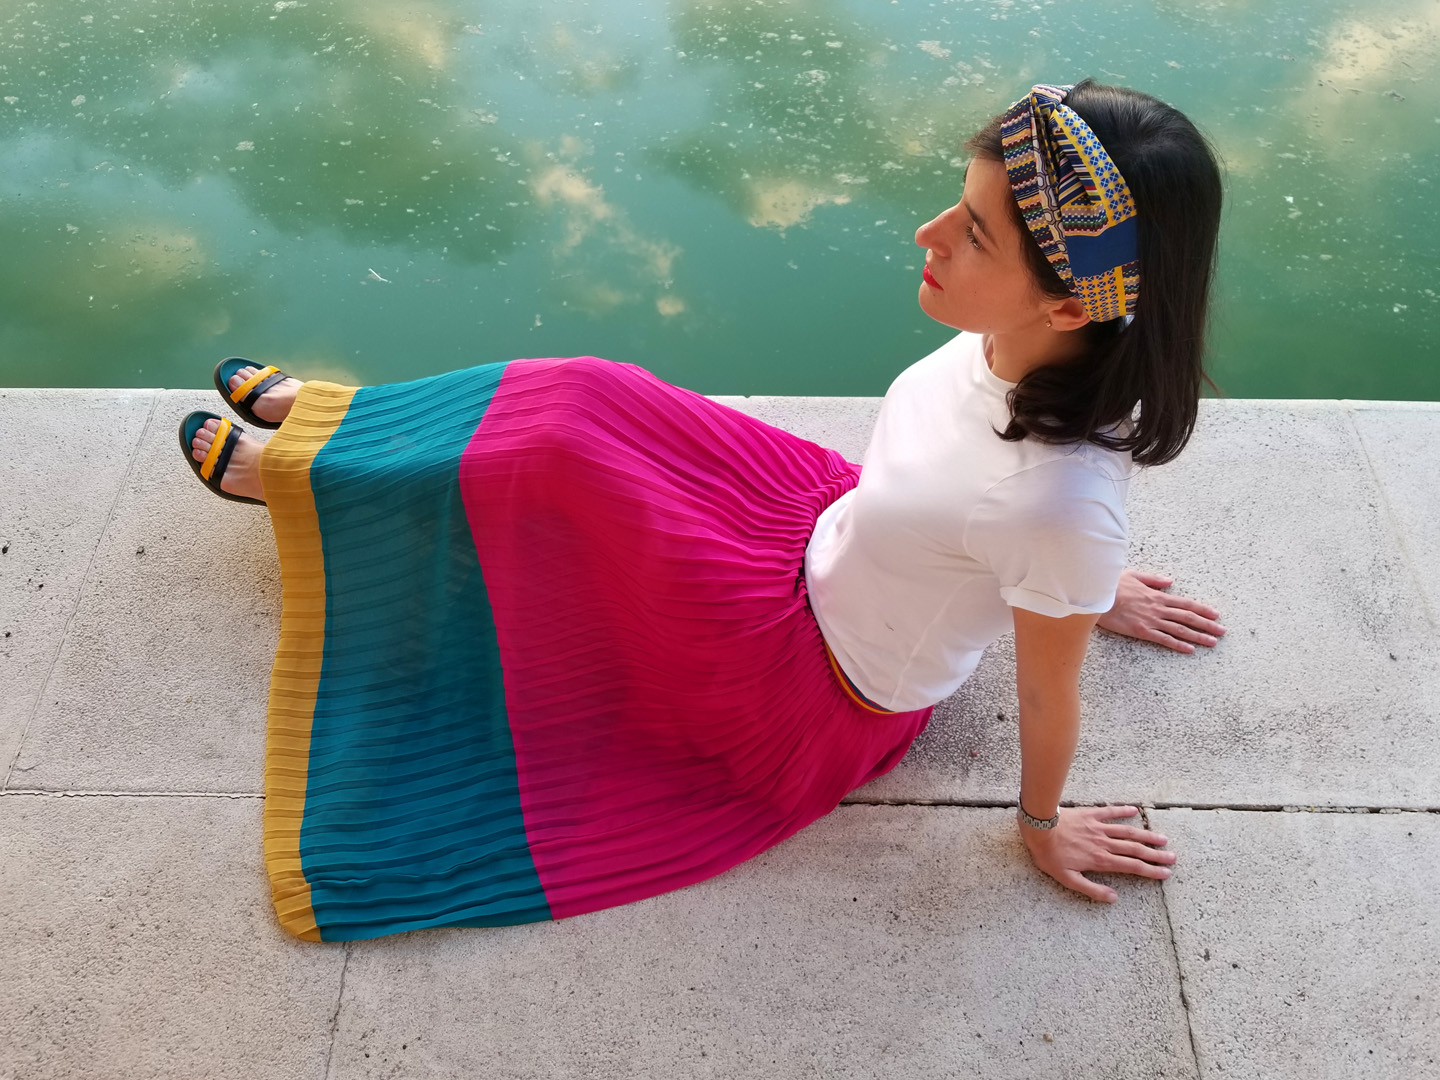 Style Indigo wearing a white t-shirt and a pleated skirt by the water